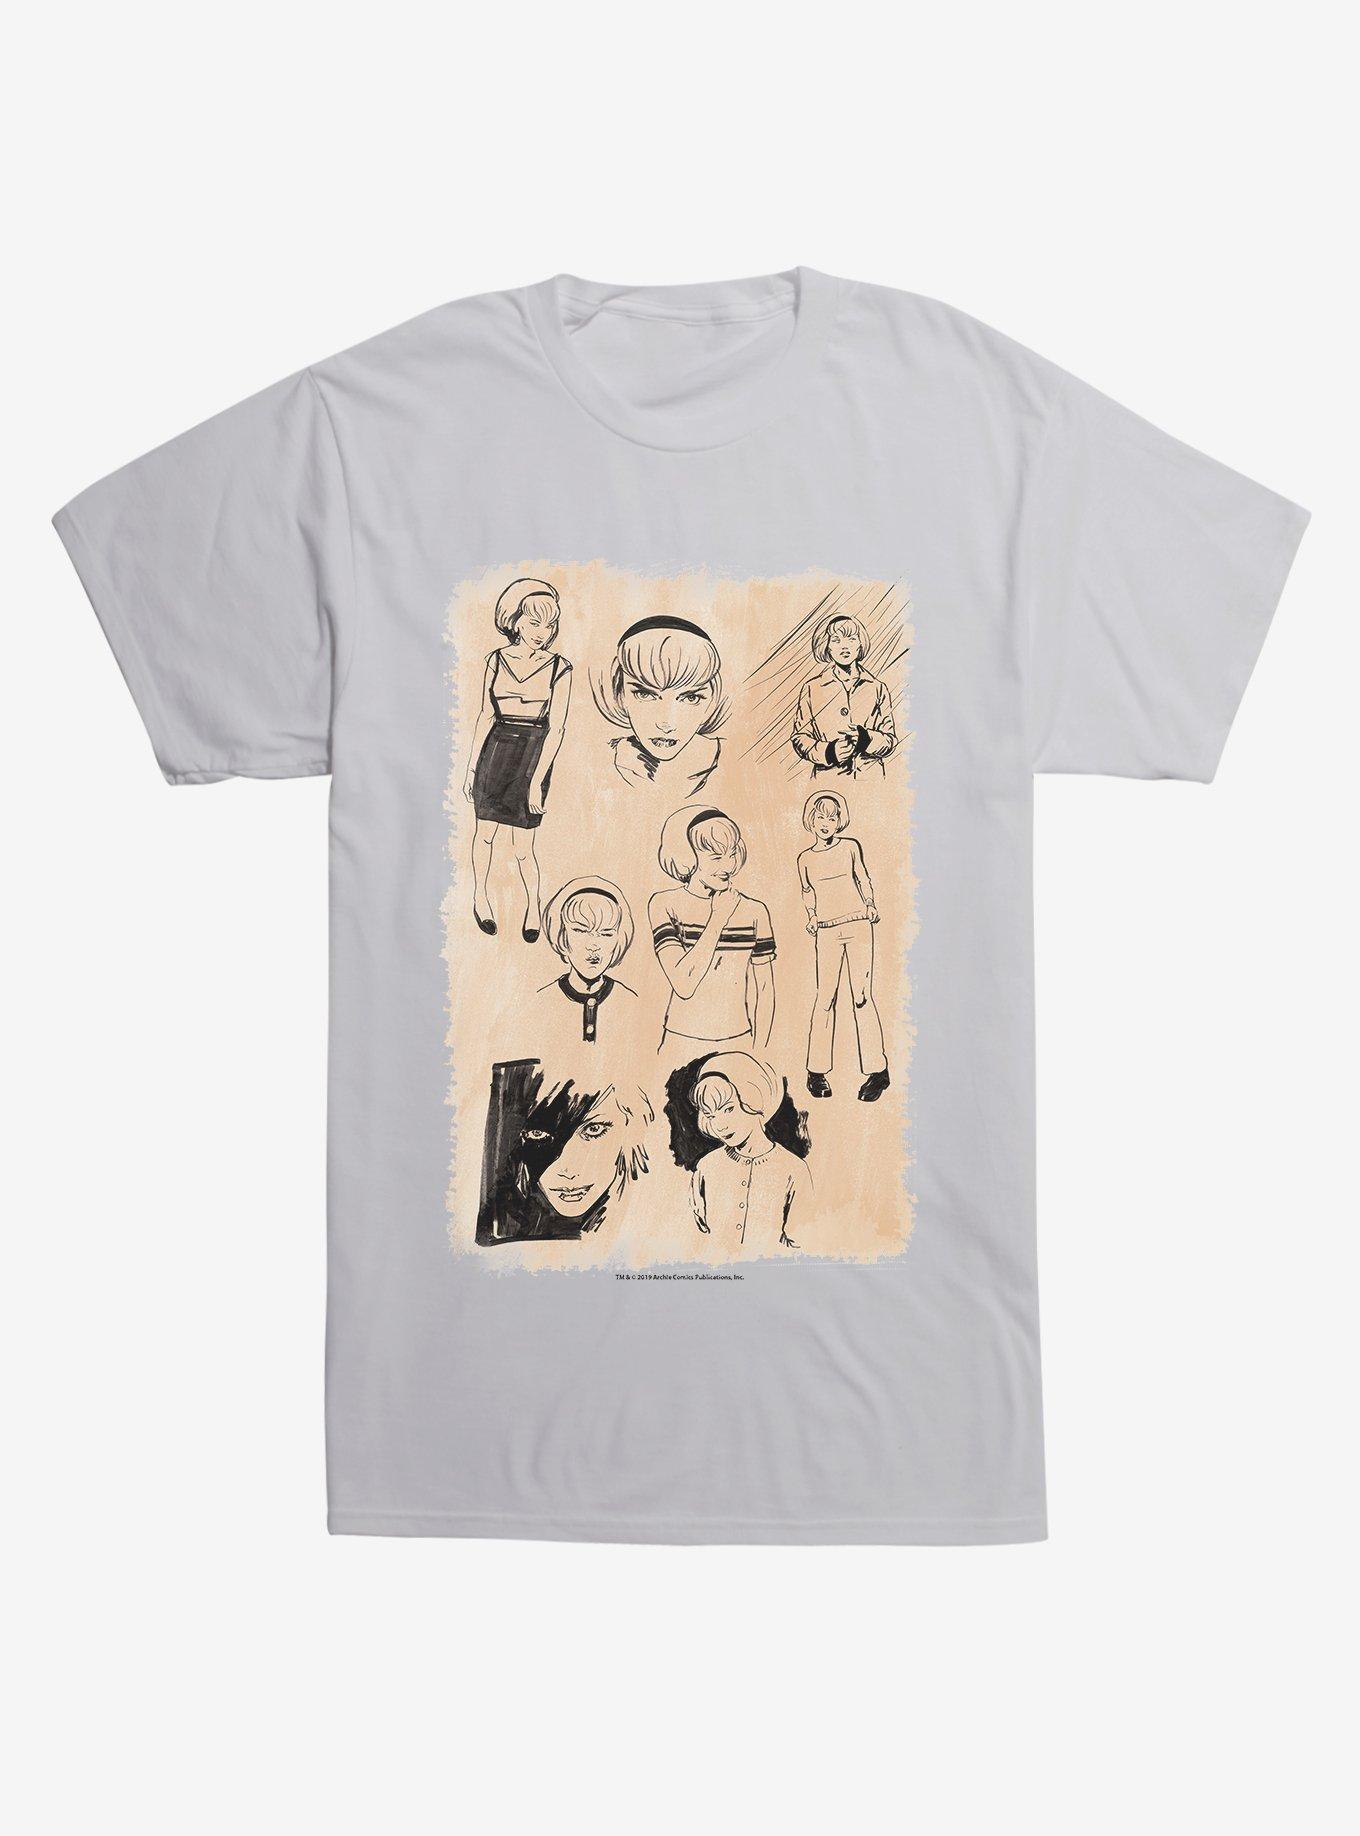 Chilling Adventures Of Sabrina Sketches White T-Shirt | Hot Topic